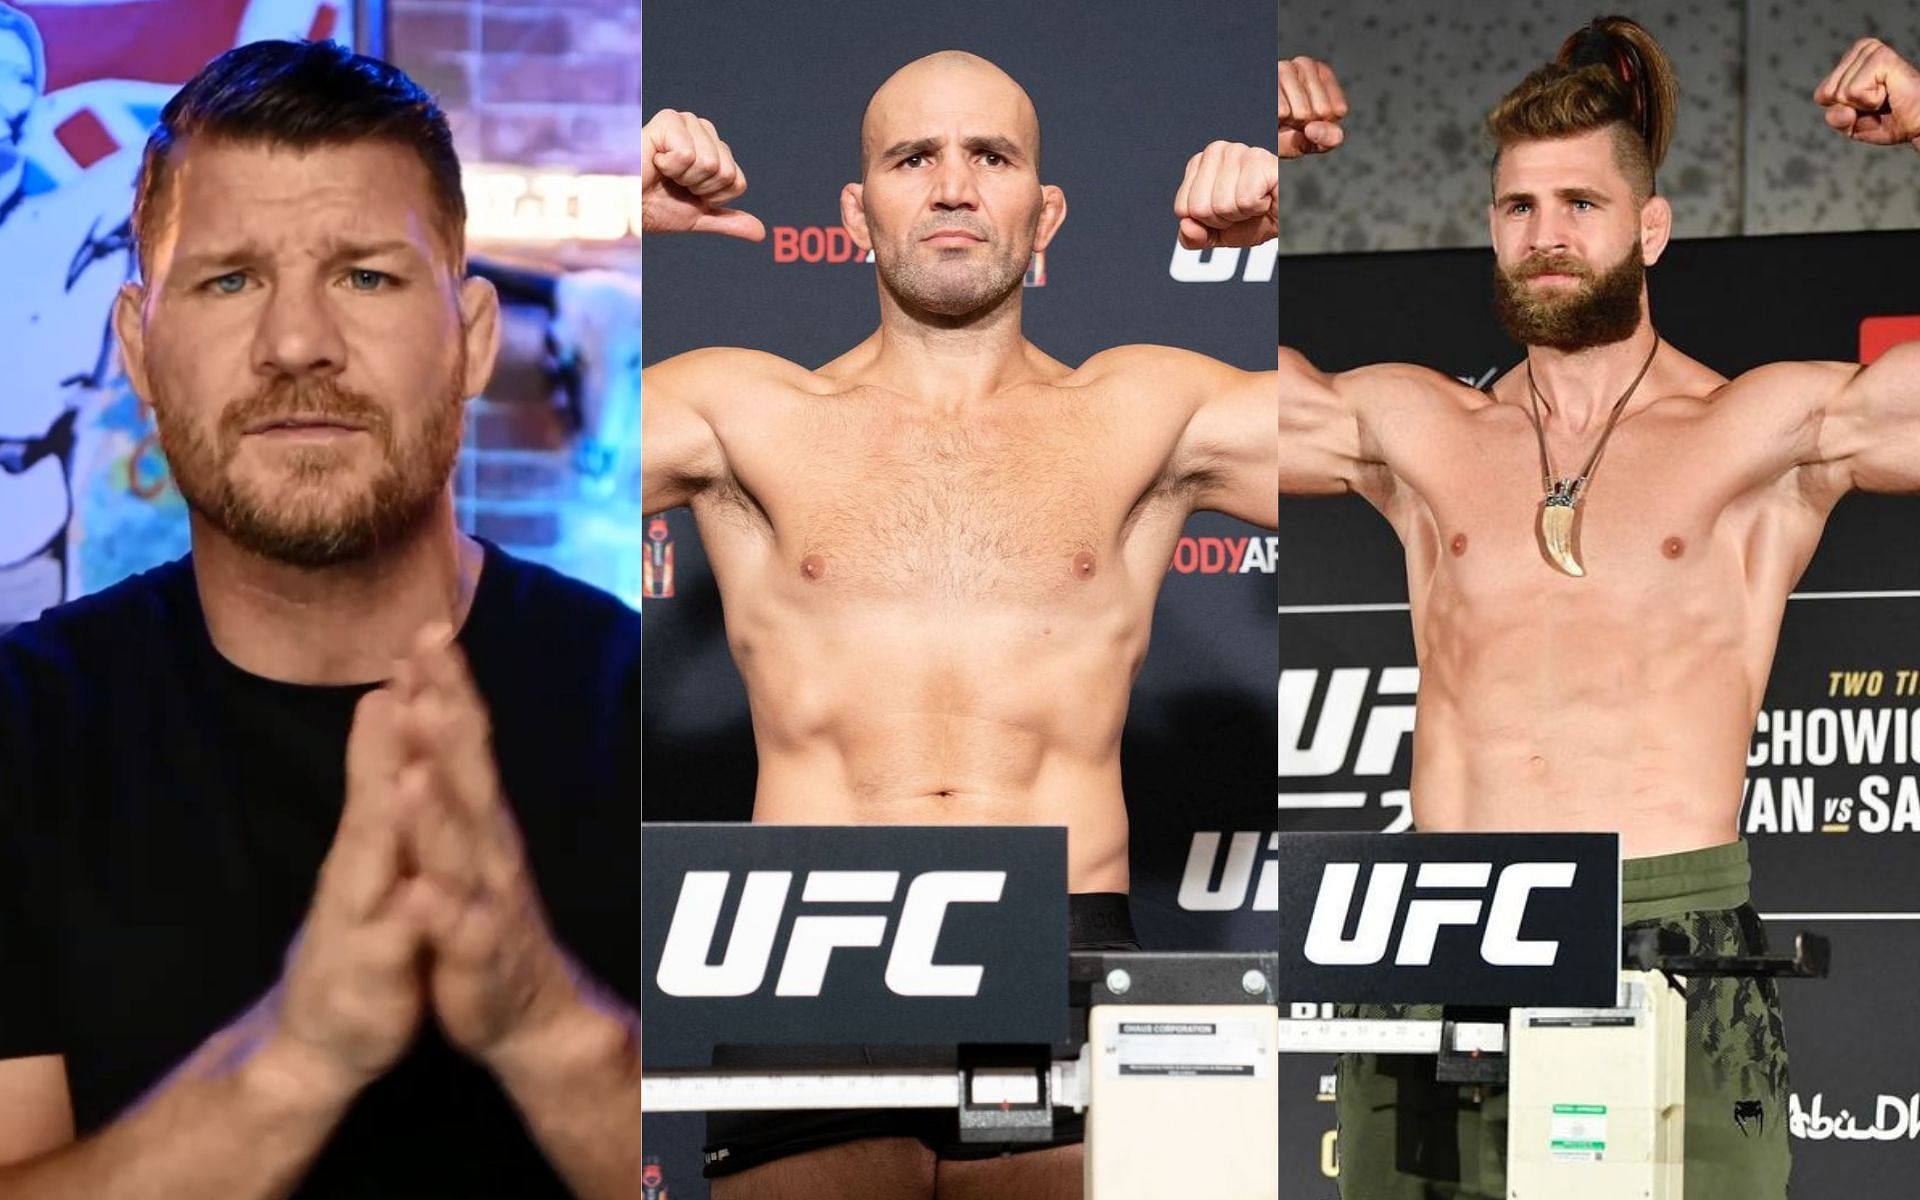 Michael Bisping (left), Glover Teixeira (middle), Jiri Prochazka (right) [Images courtesy: Michael Bisping via YouTube, @gloverteixeira, and @jirkaprochazka via Instagram]